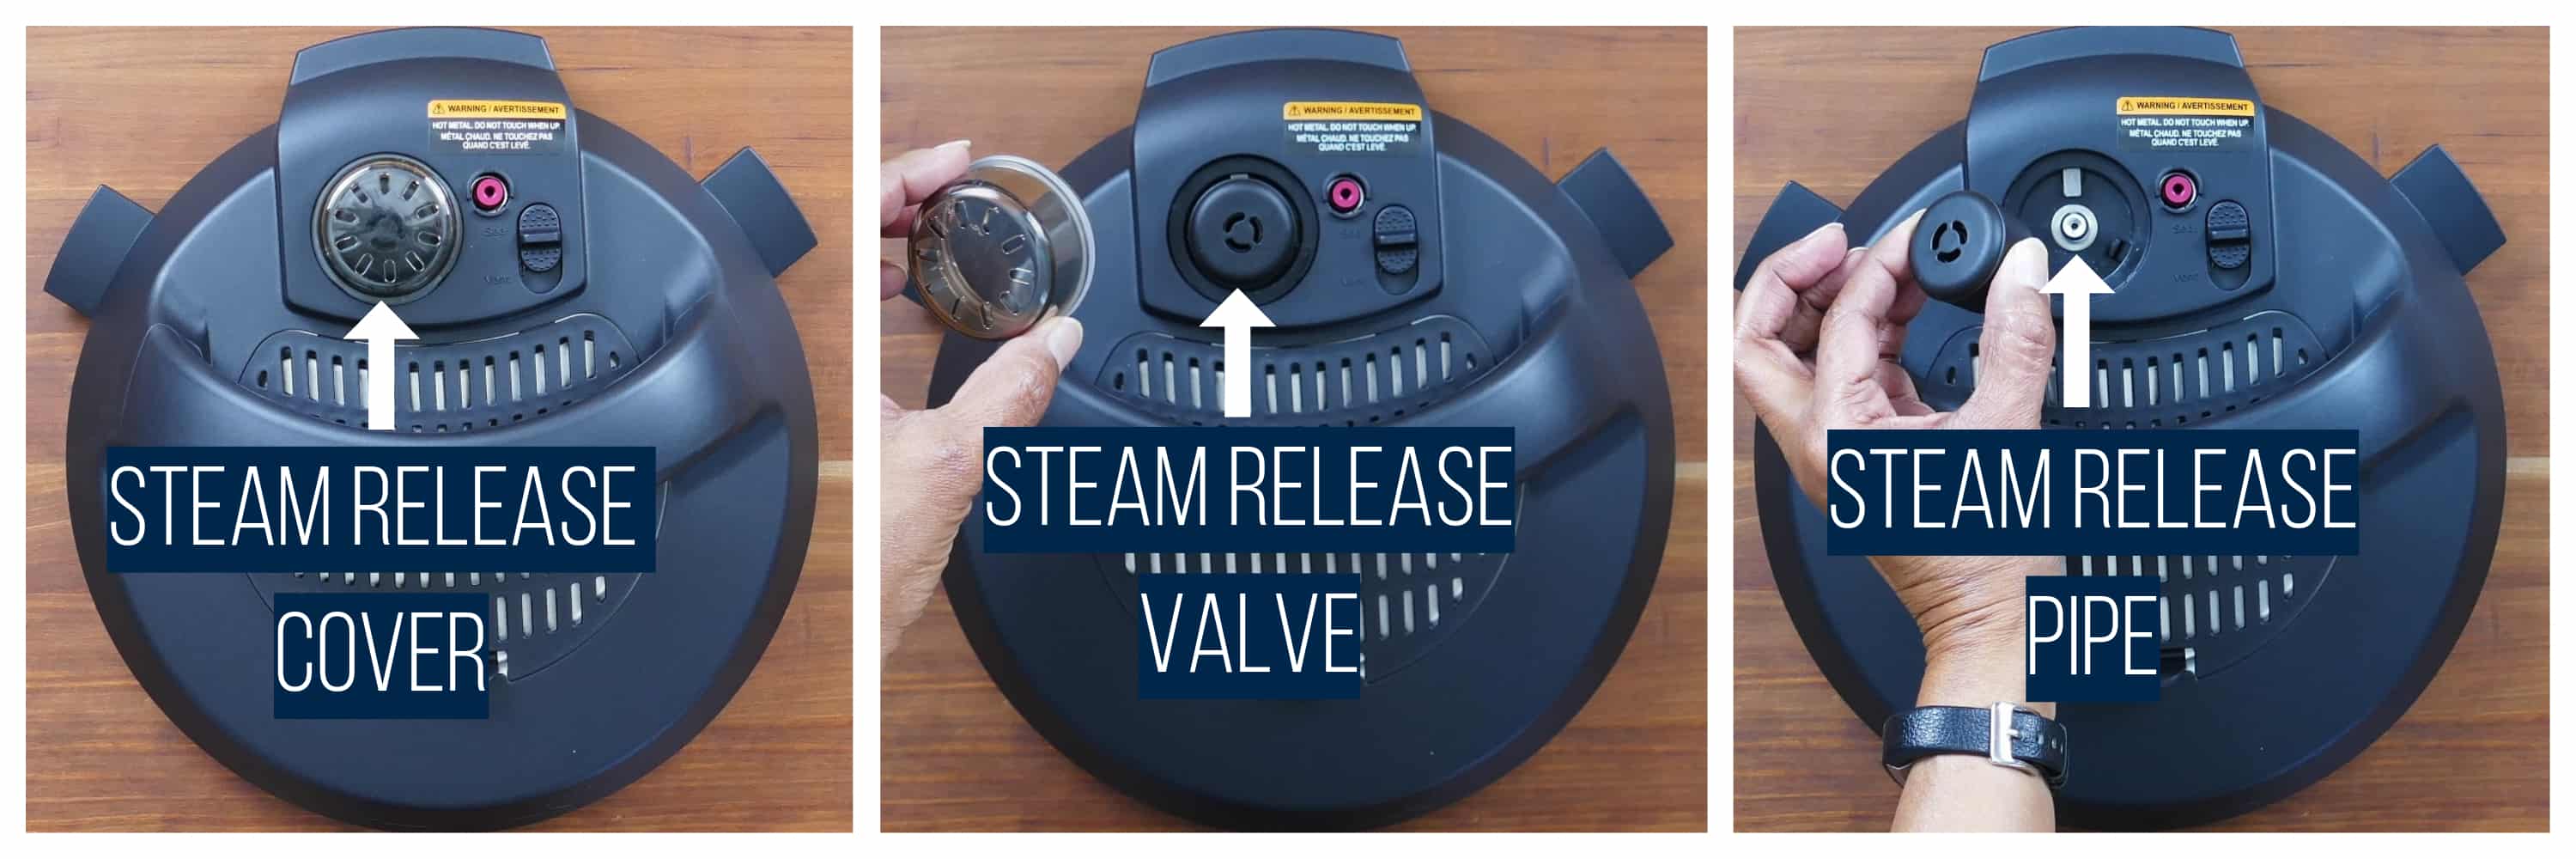 Instant Pot Pro Crisp collage - steam release cover, removed, steam release valve, removed, steam release pipe - Paint the Kitchen Red